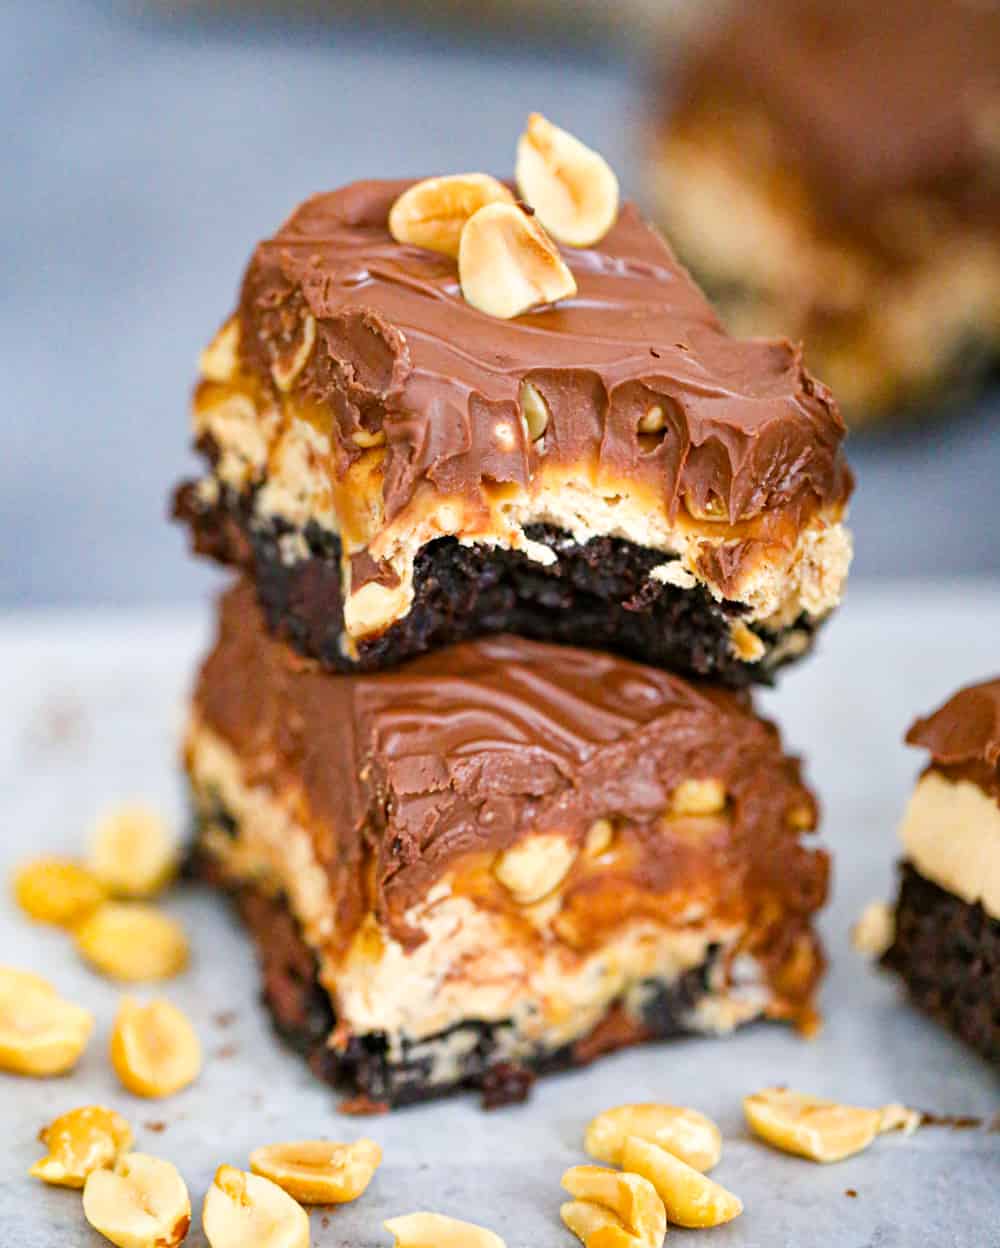 snickers brownie recipe